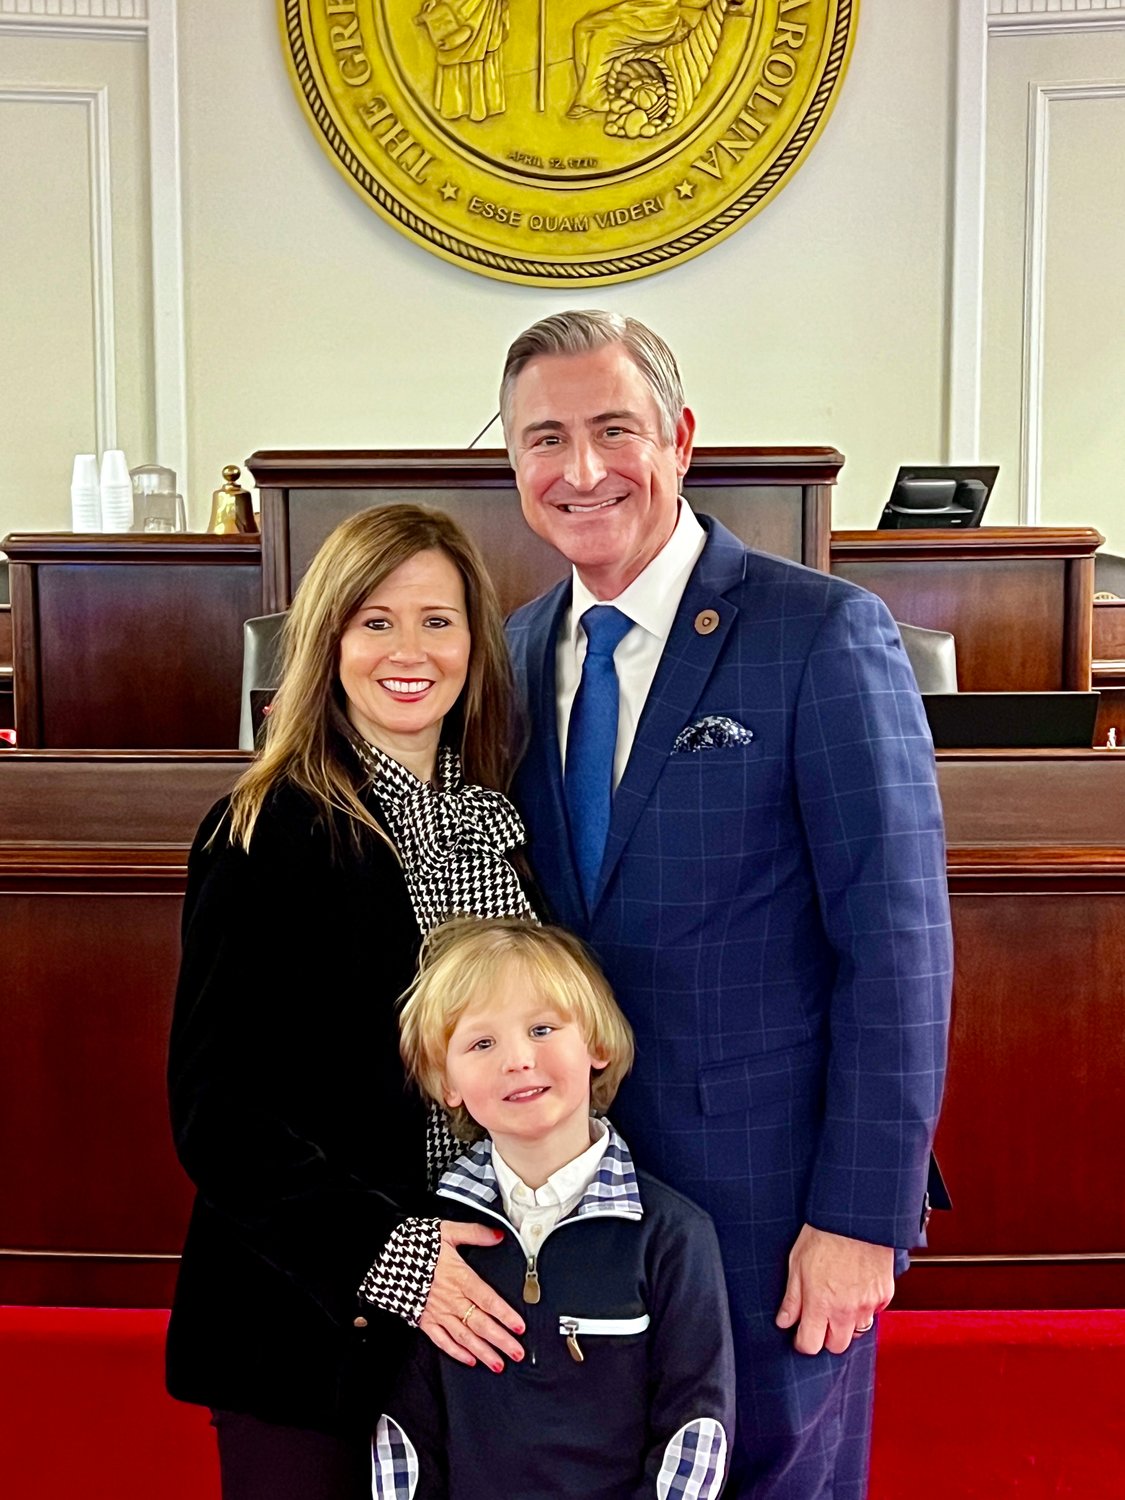 State Sen. Kirk deViere with his wife, Jenny, and their son Grey. 'Thank you for trusting me with your voice. It has been one of my greatest honors to serve the people of Cumberland County over the last two terms in the North Carolina Senate.'